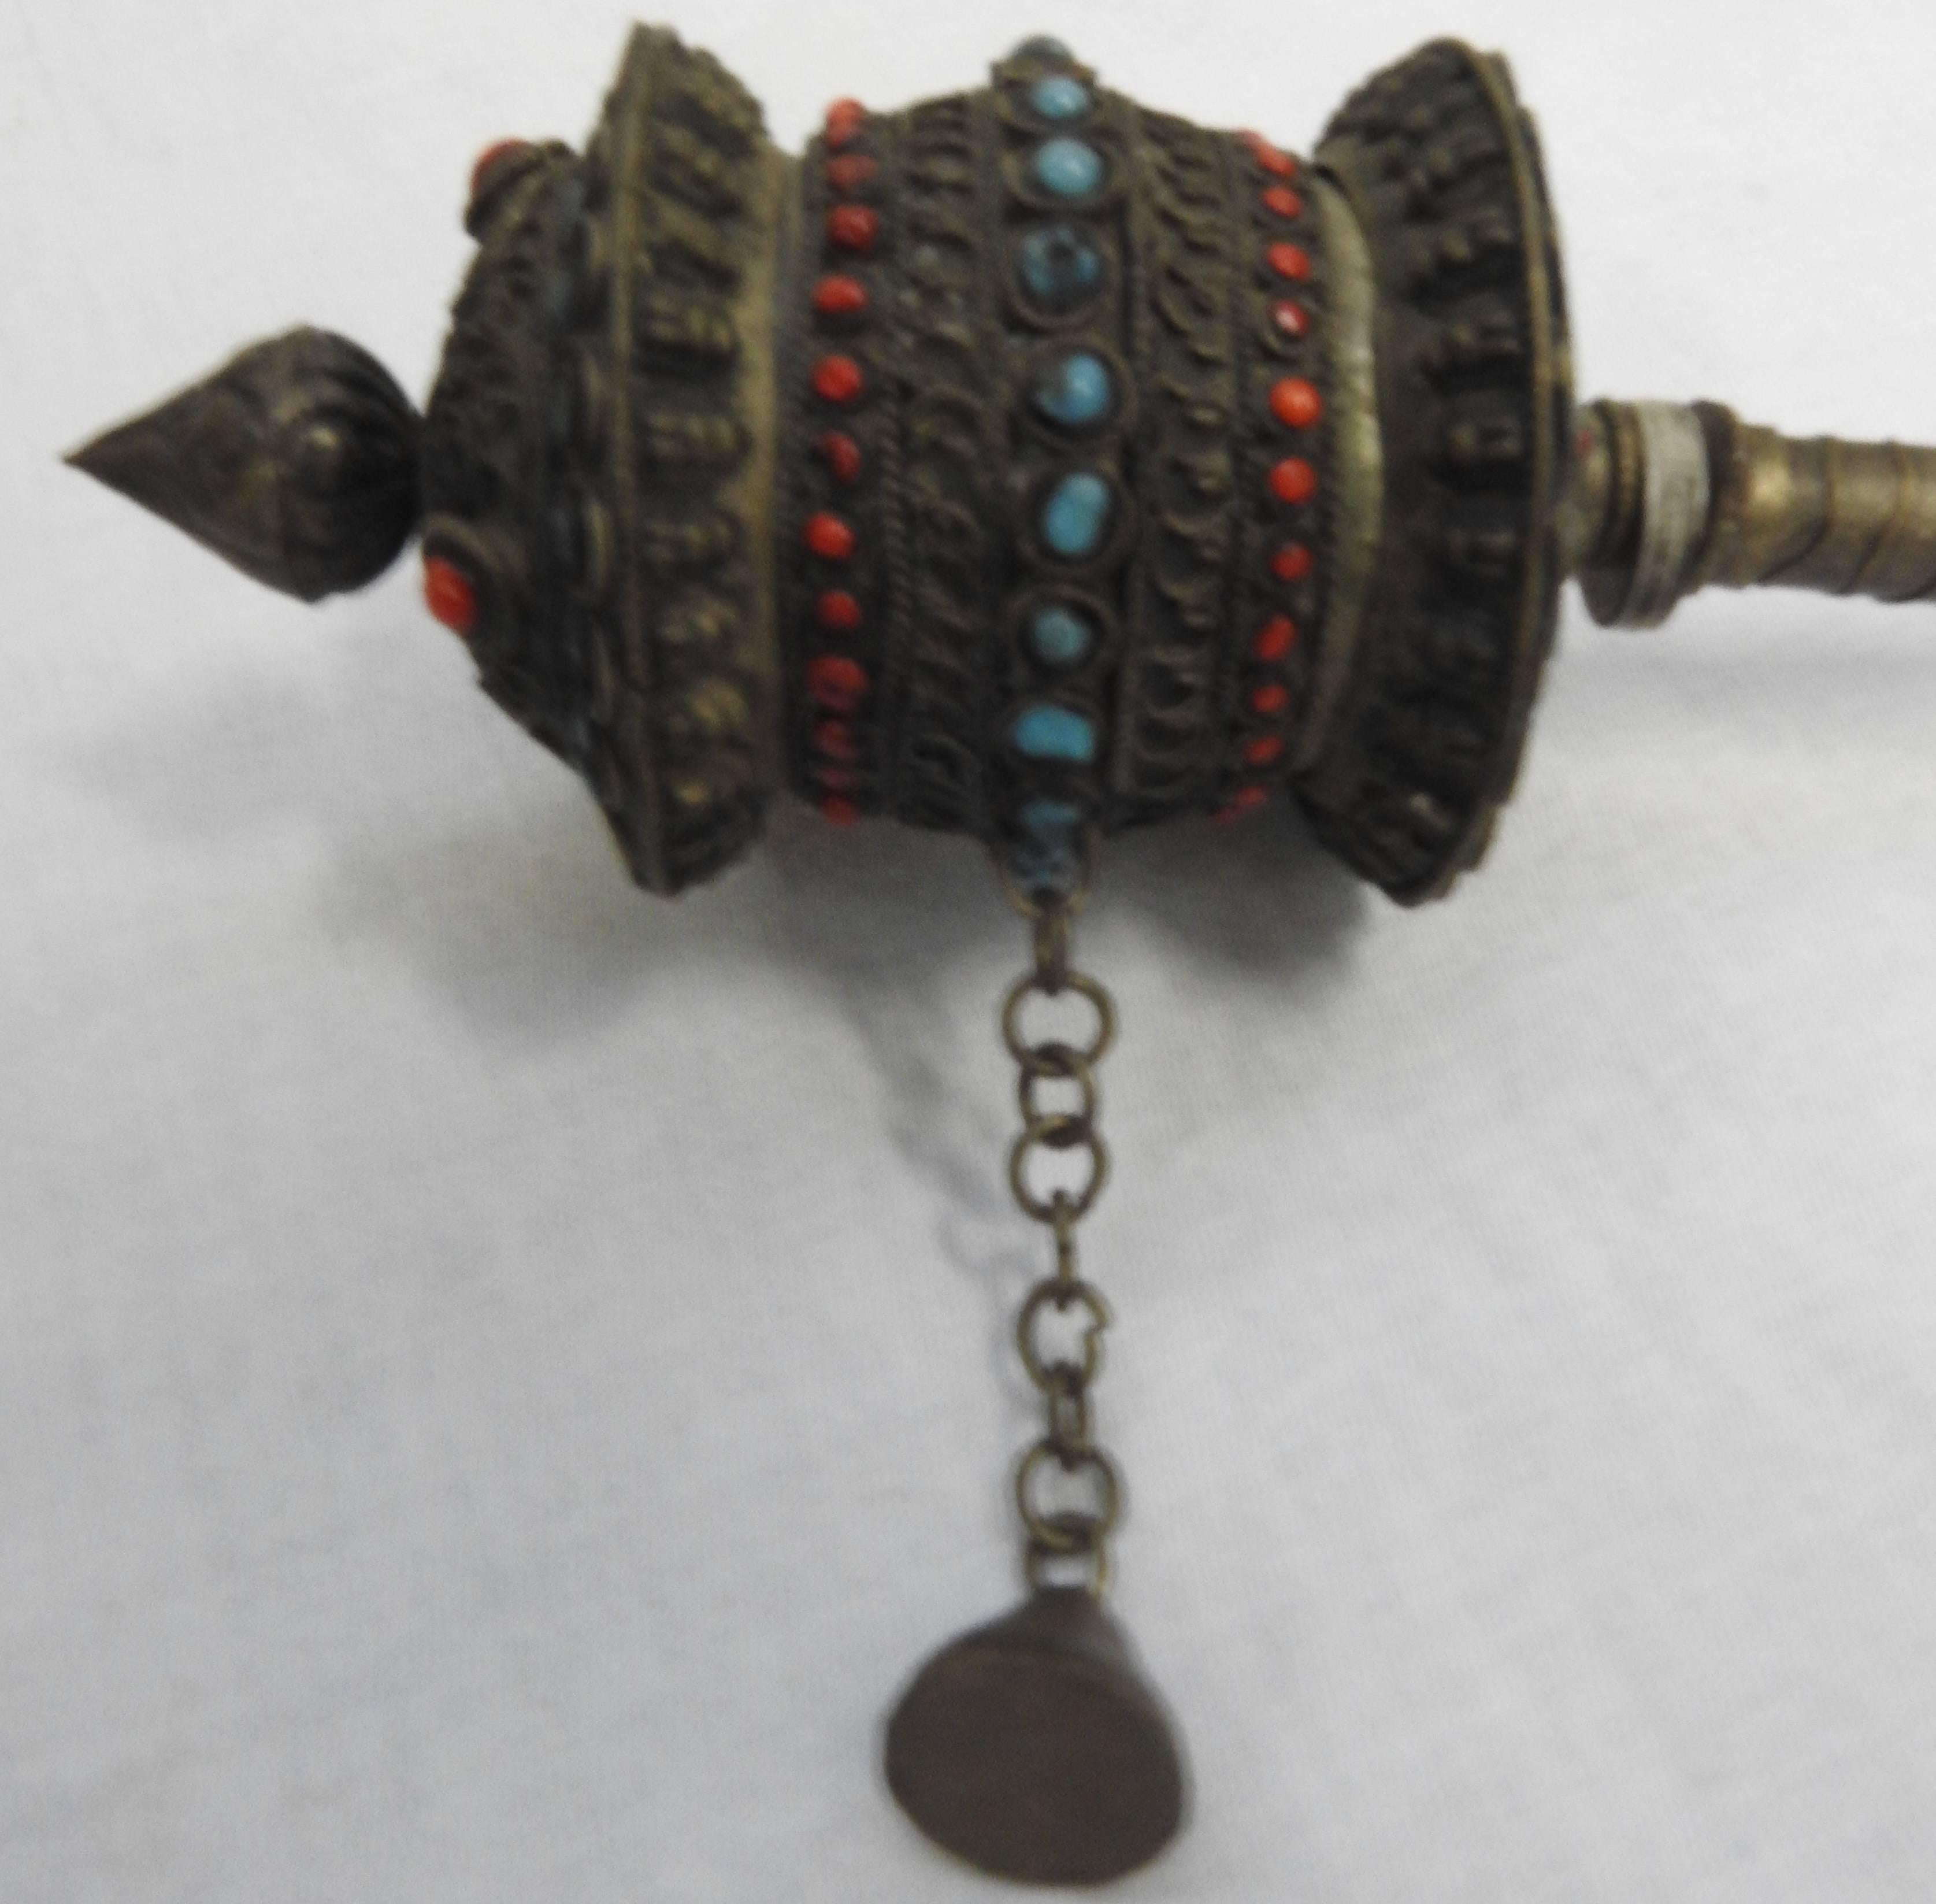 This is a Buddhist Mani prayer wheel. This silver hand-held Mani consists of a tapered handle on a central spoke, around which revolves a cylindrical mill head etched and decorated with multicolored stones. The mill head opens to reveal a thin paper